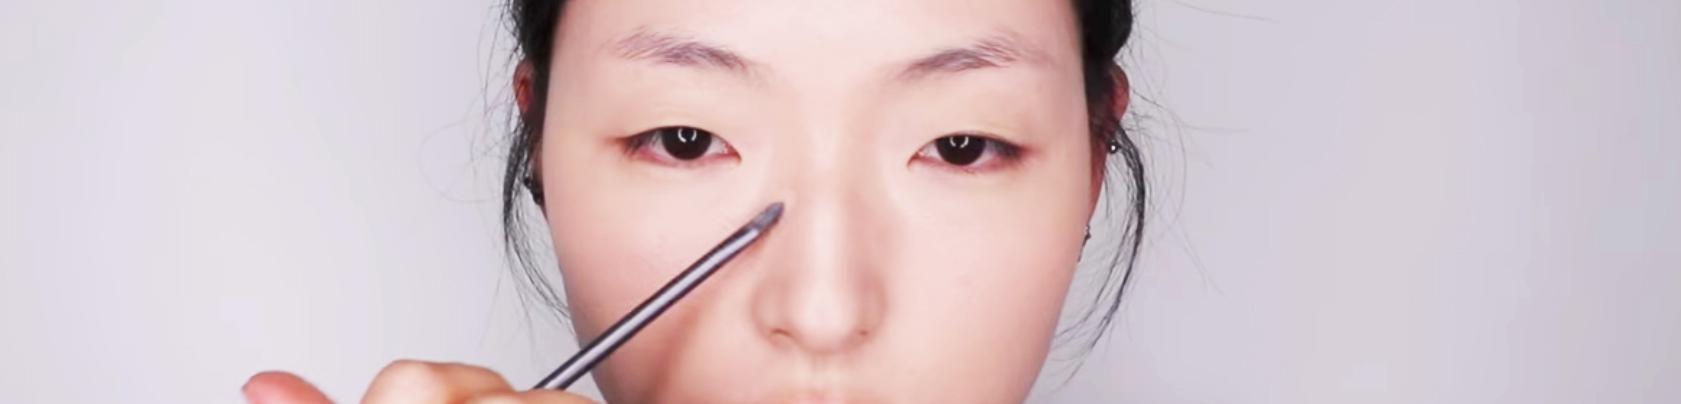 All the Tips I Learned From Binge Watching Korean Beauty Videos All Weekend